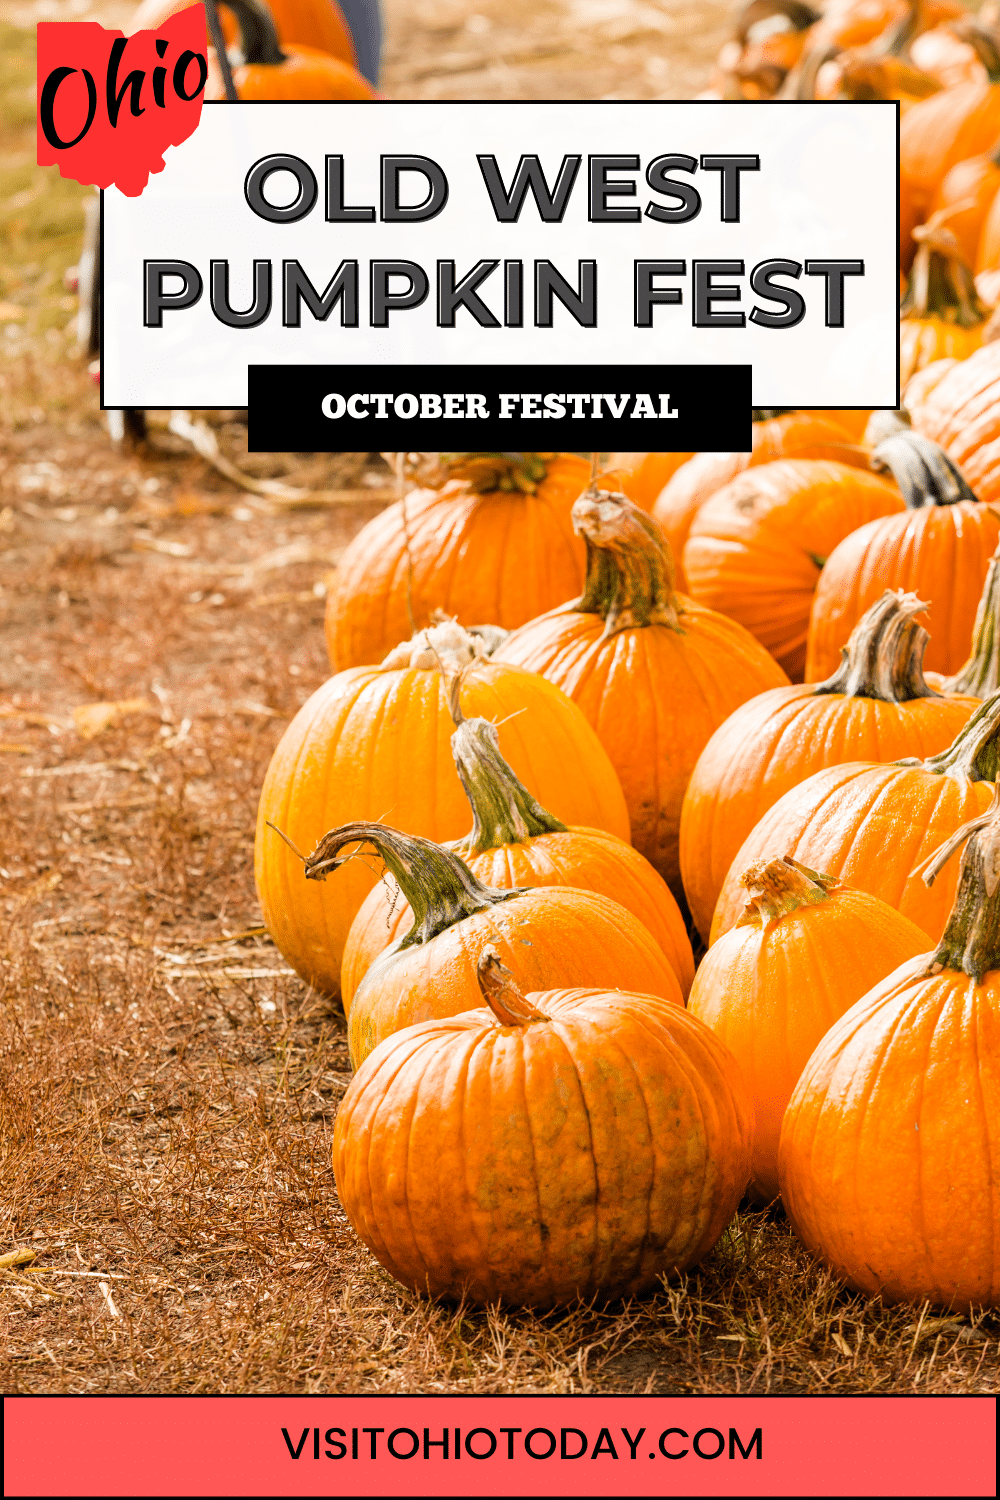 The Old West Pumpkin Fest is presented by Rockin ‘R Ranch in Columbia Station, Lorain County throughout October. Starting on Saturday September 23 and finishing on Sunday October 29 2023.